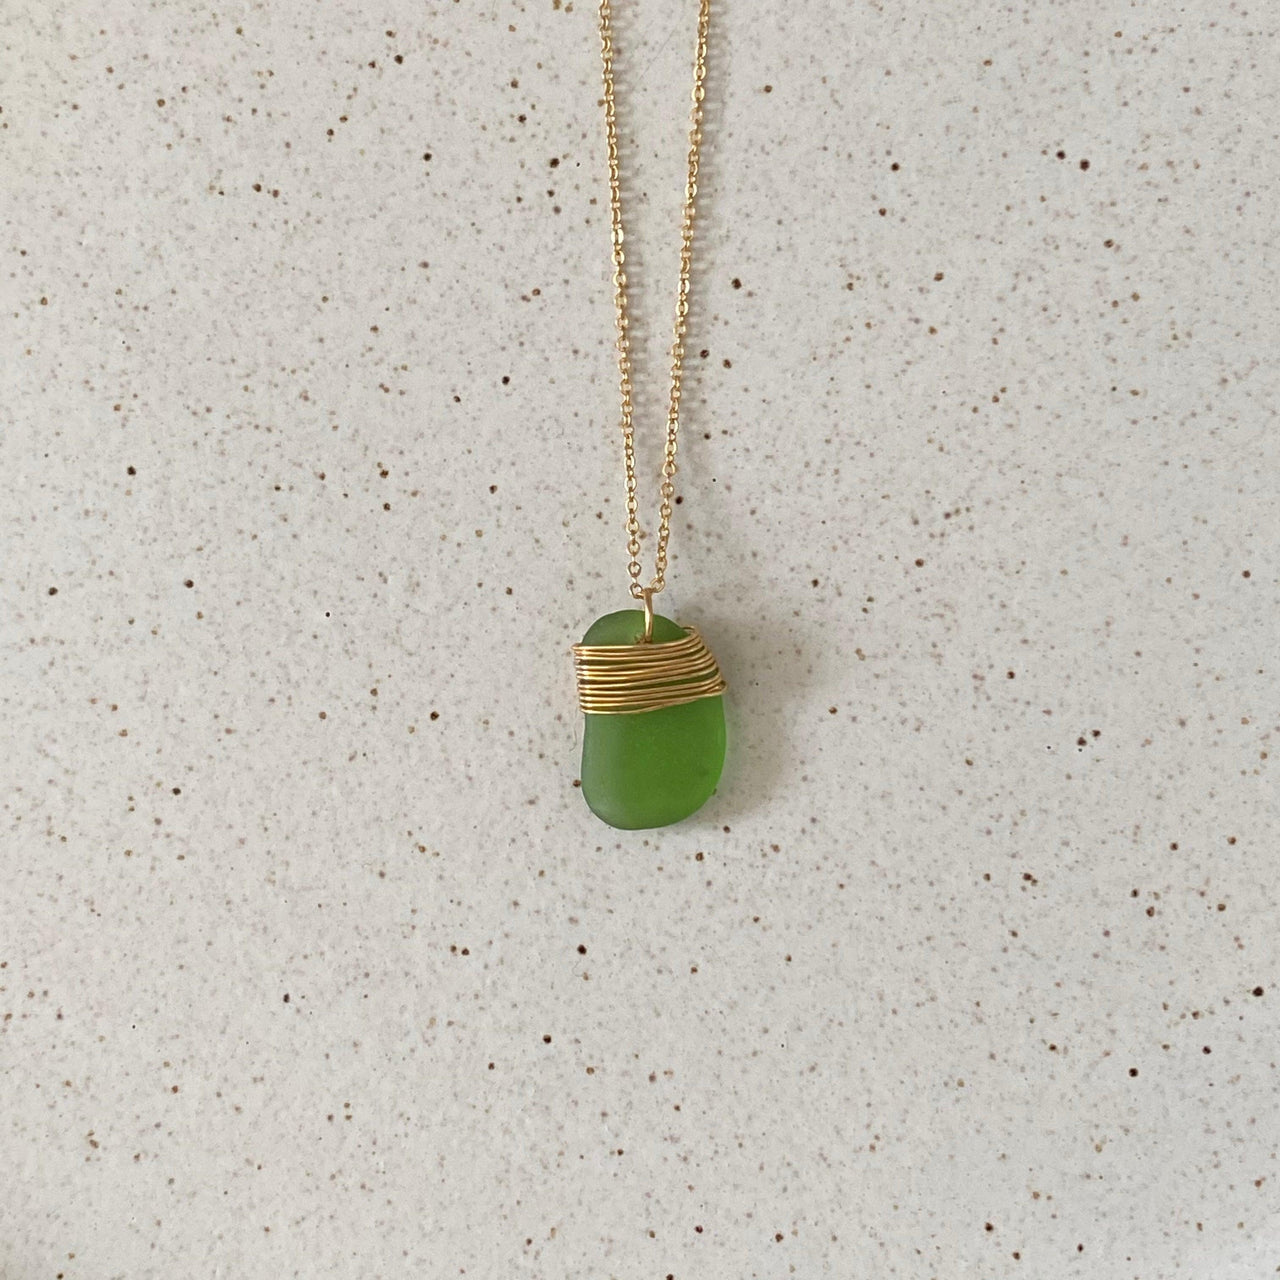 Seaglass Necklace - Necklace - cf-type-necklace, us-retail - Upcycle Studio